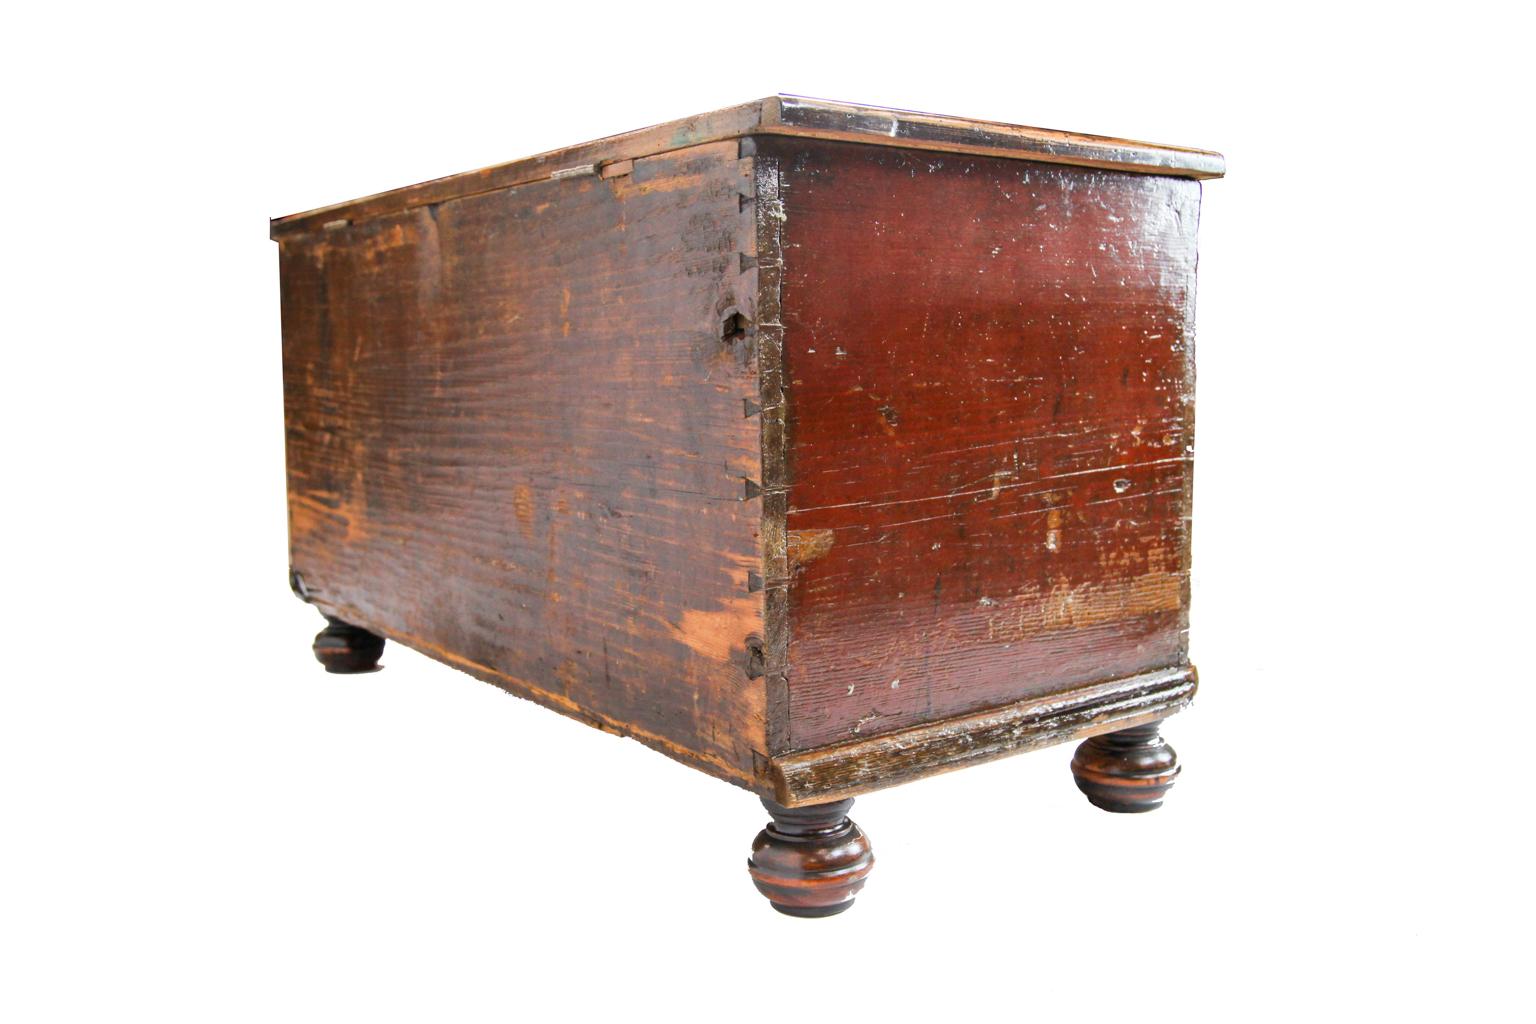 Steel 19th Century Painted Blanket Chest For Sale